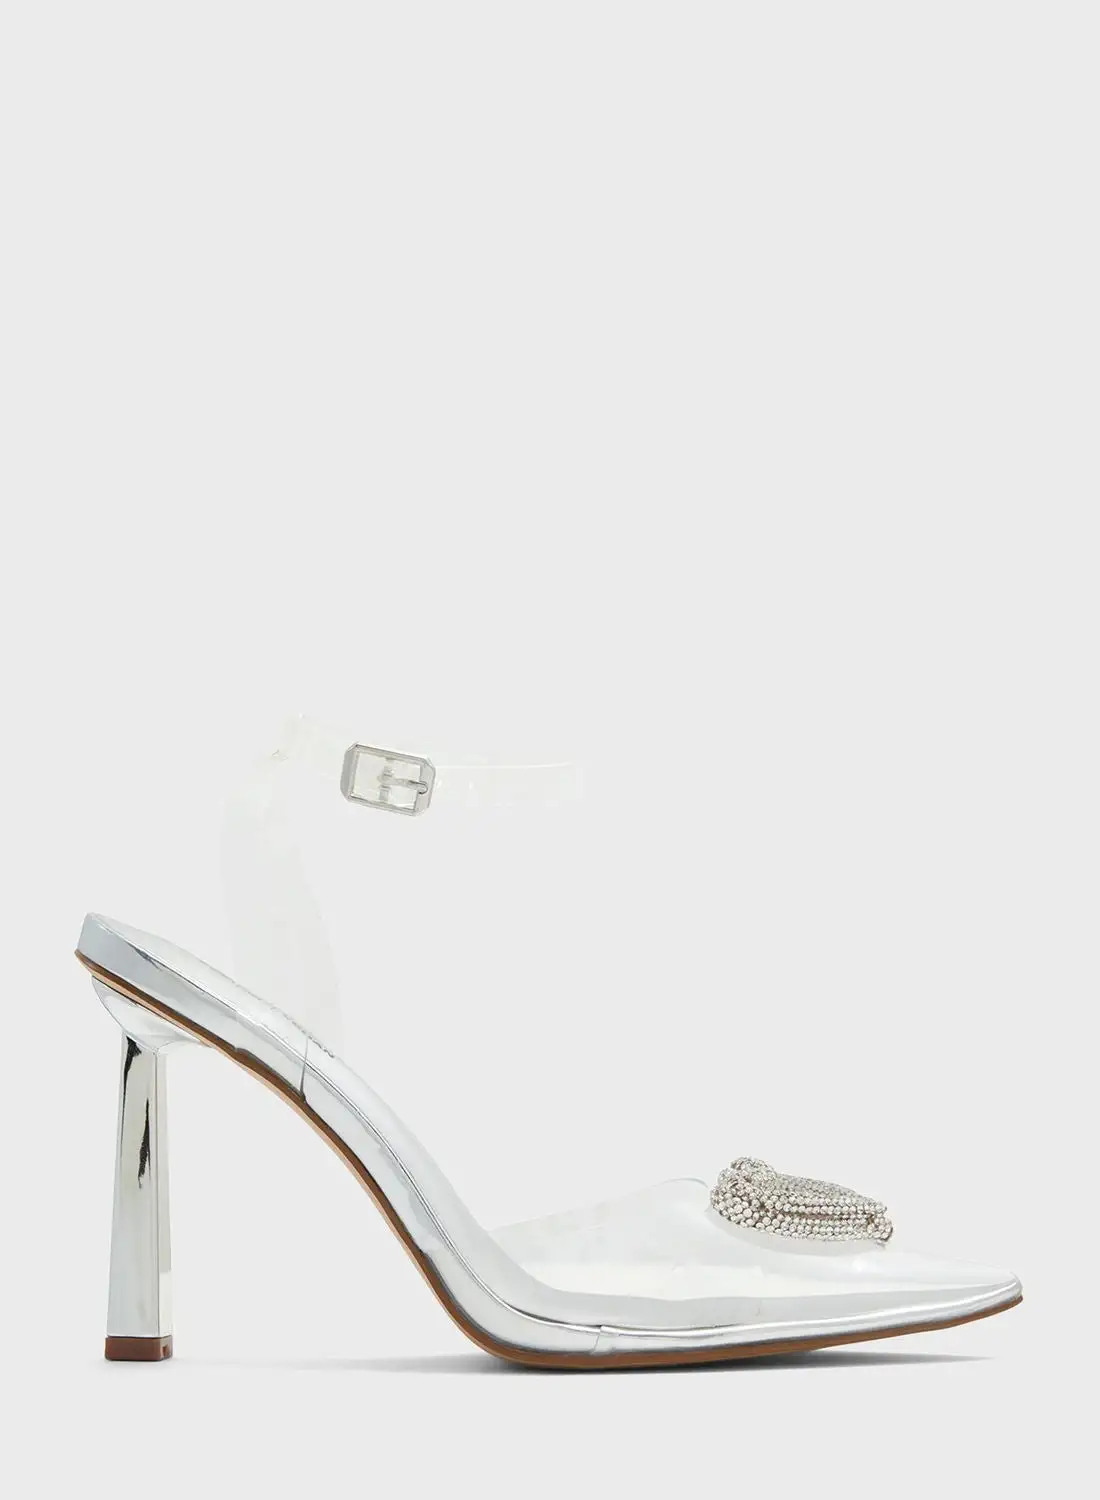 CALL IT SPRING Angellina Pumps